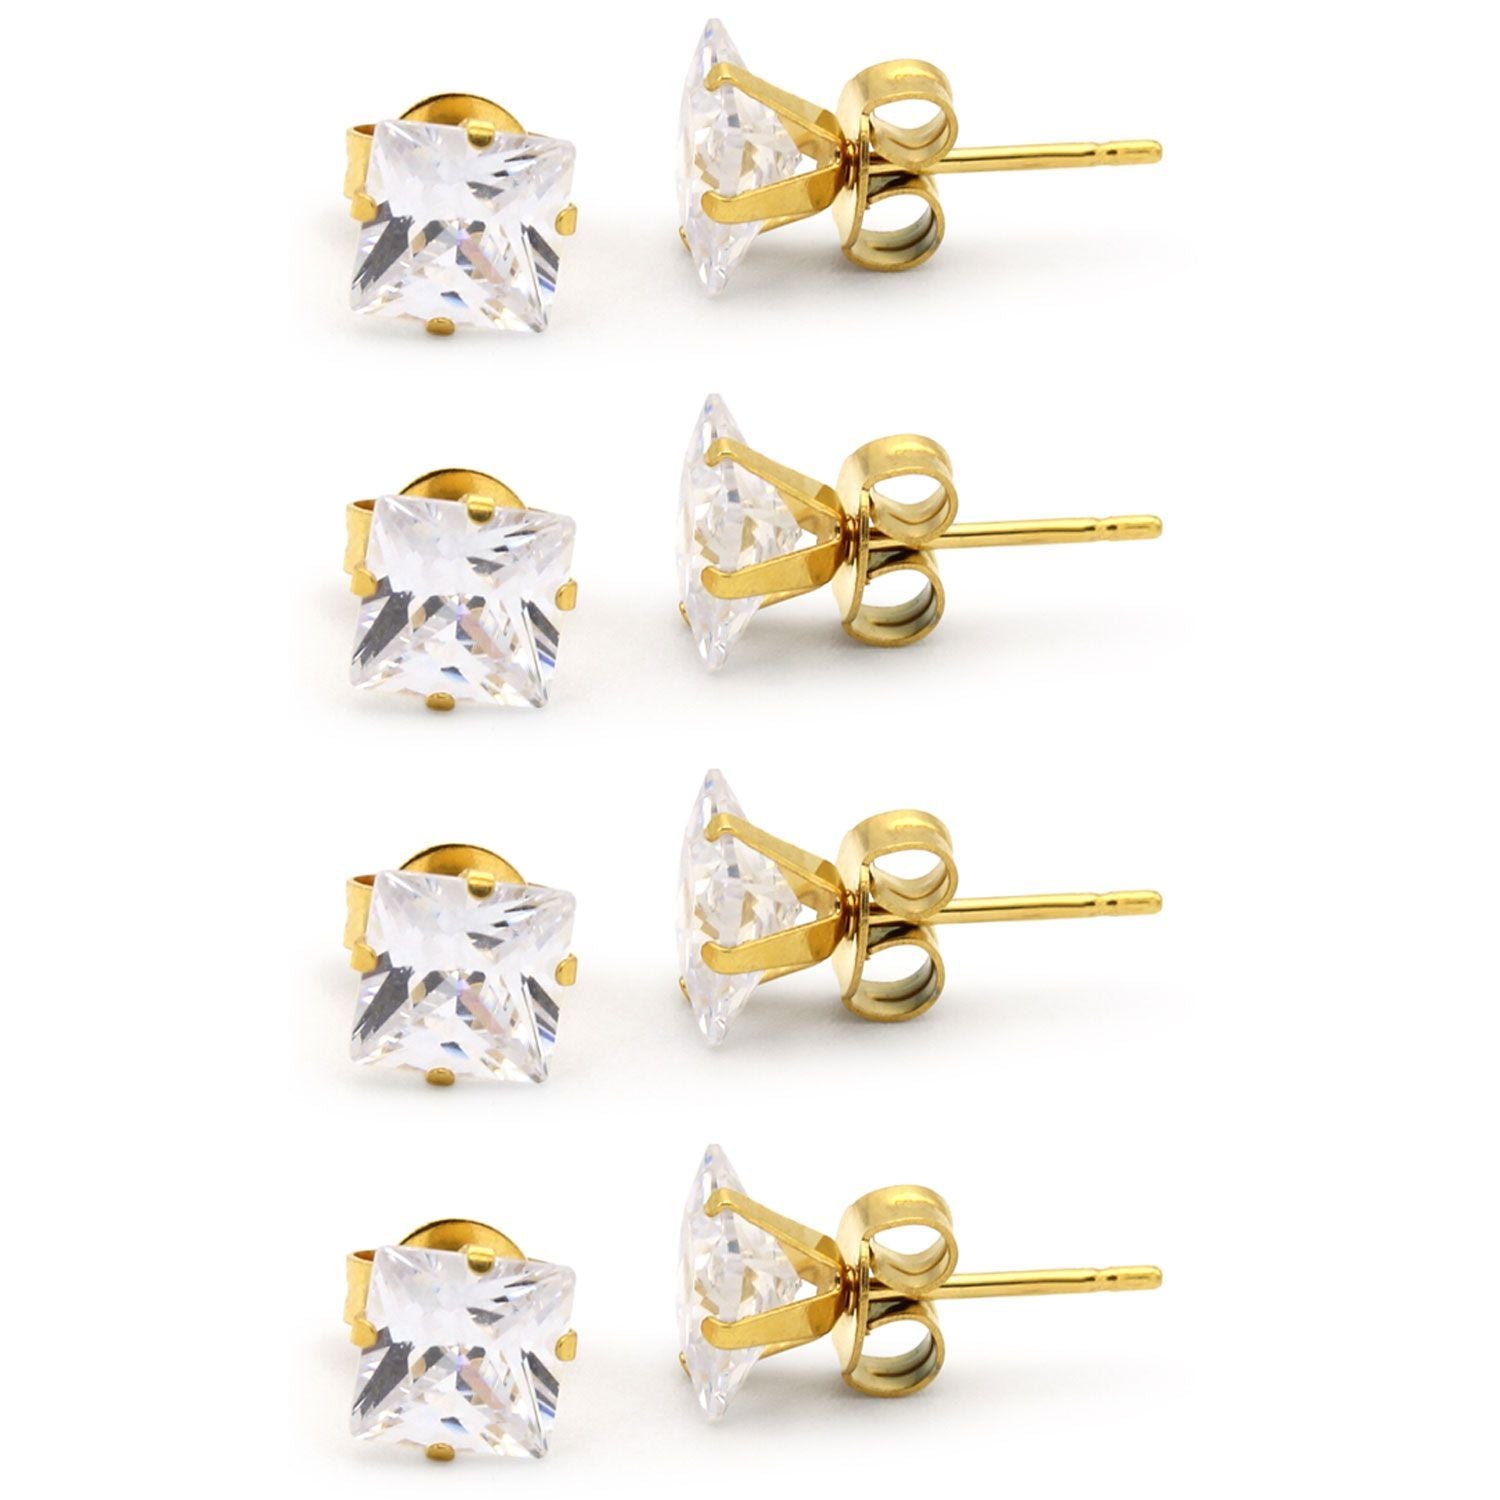 Cubic Zirconia Square 14K Gold Plated Stud Earrings Set Of 4 Stainless Steel Jewelry Men Women